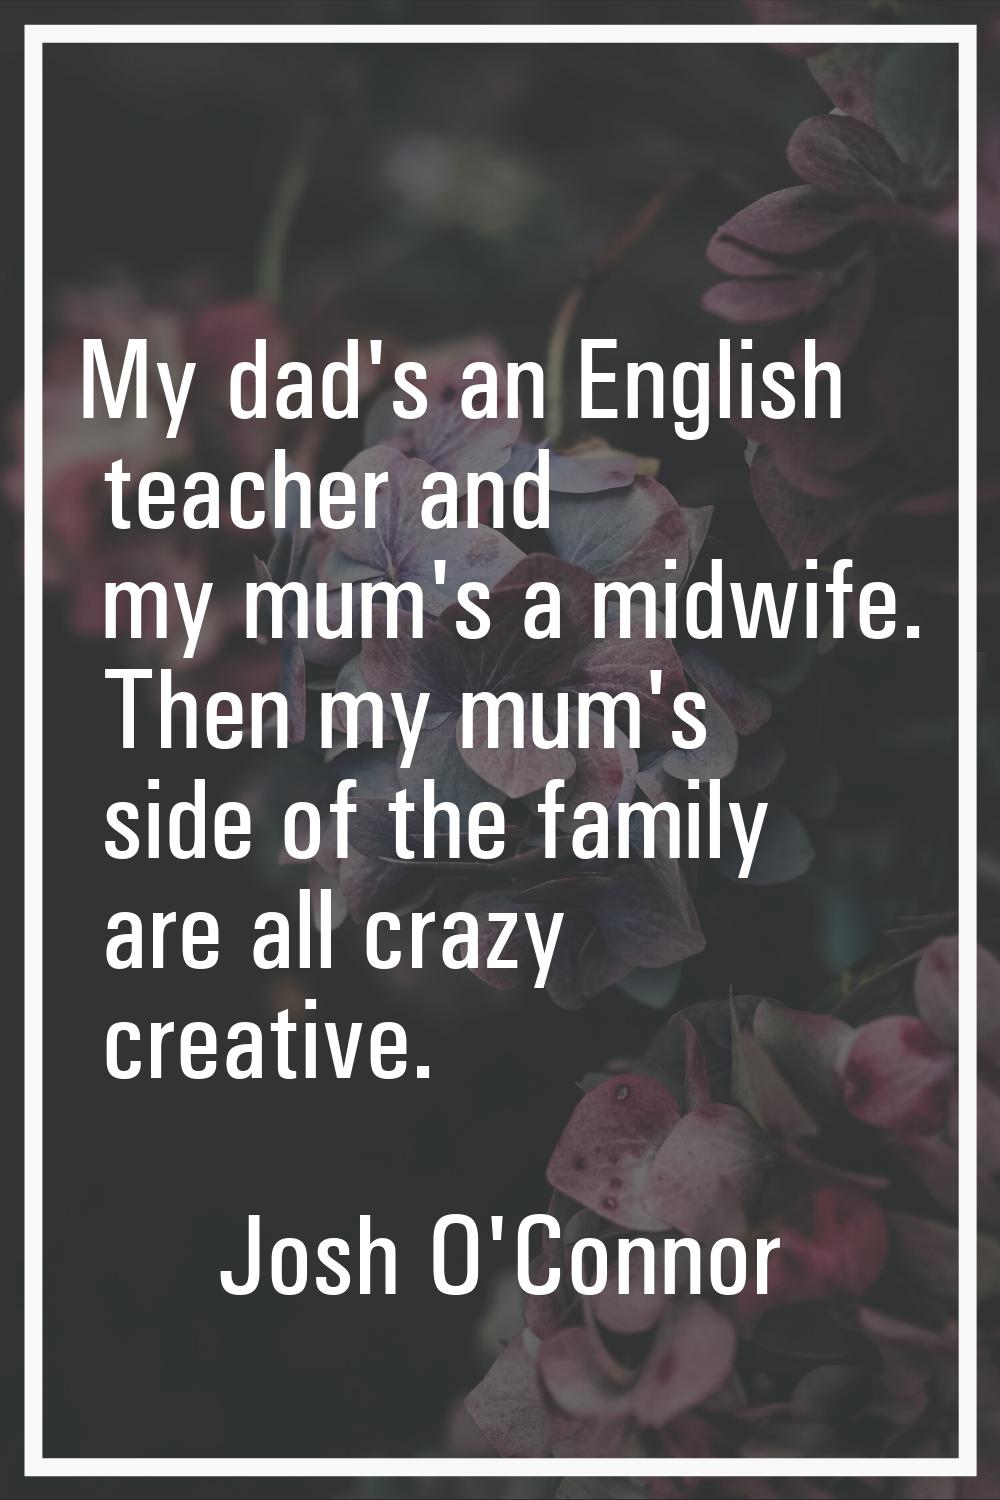 My dad's an English teacher and my mum's a midwife. Then my mum's side of the family are all crazy 